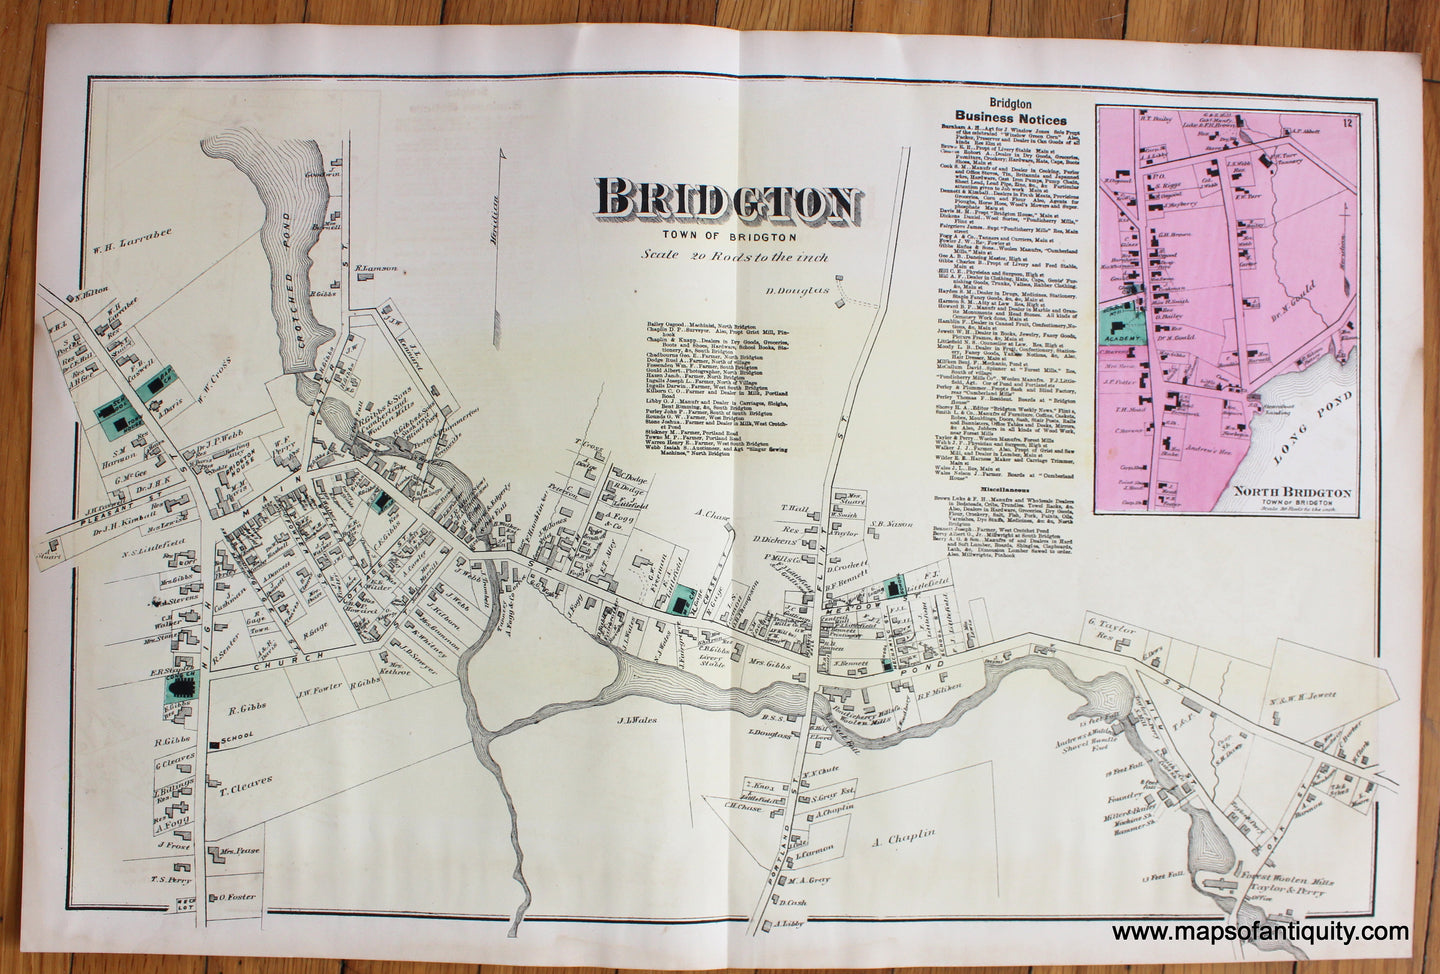 Antique-Map-Town-City-Village-Bridgton-Cumberland-County-Maine-Beers-1871-1870s-1800s-Mid-Late-19th-Century-Maps-of-Antiquity